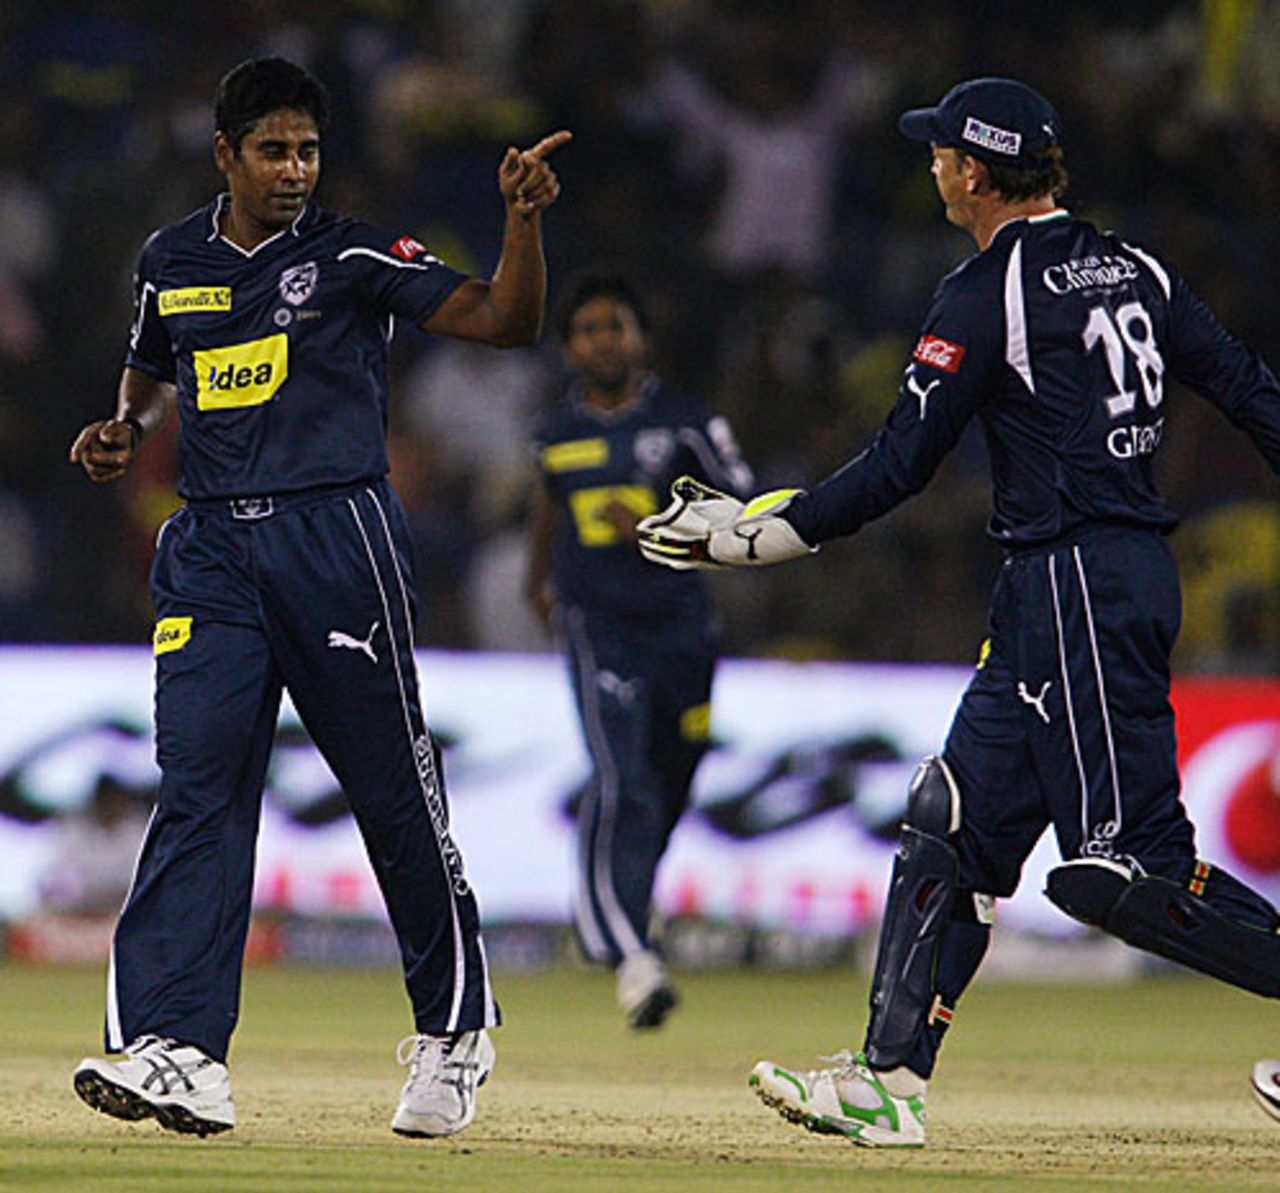 Chaminda Vaas took 2 for 27 to set Punjab back early, Deccan Chargers v Kings XI Punjab, IPL, Cuttack, March 19, 2010 